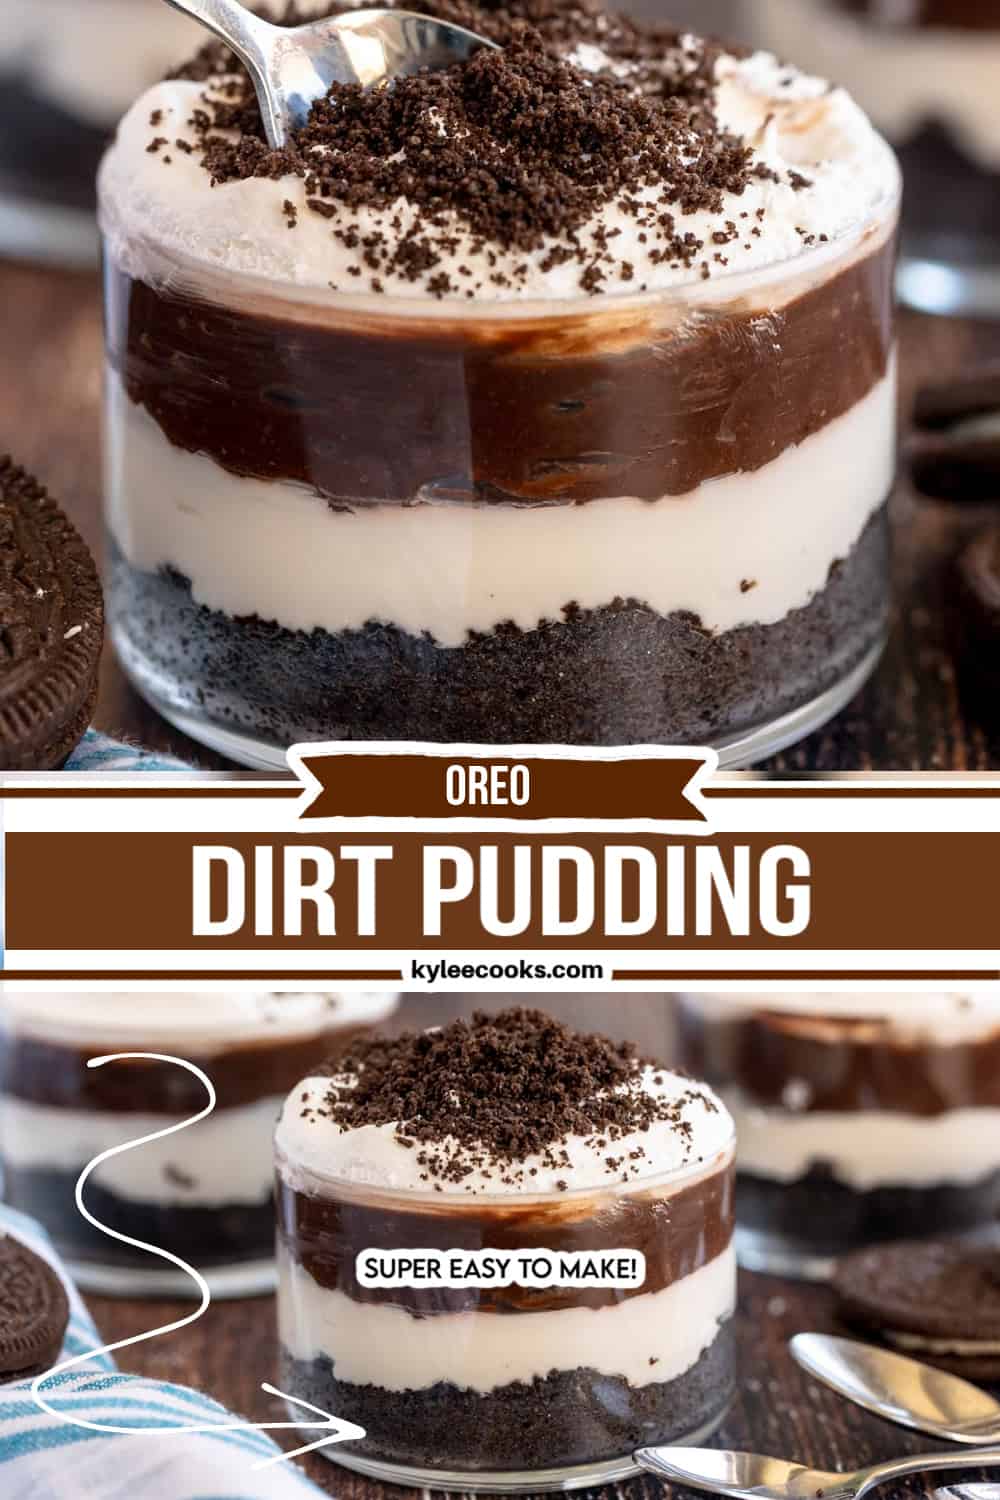 oreo dirt pudding in a glass, with recipe ingredients and title overlaid in text.